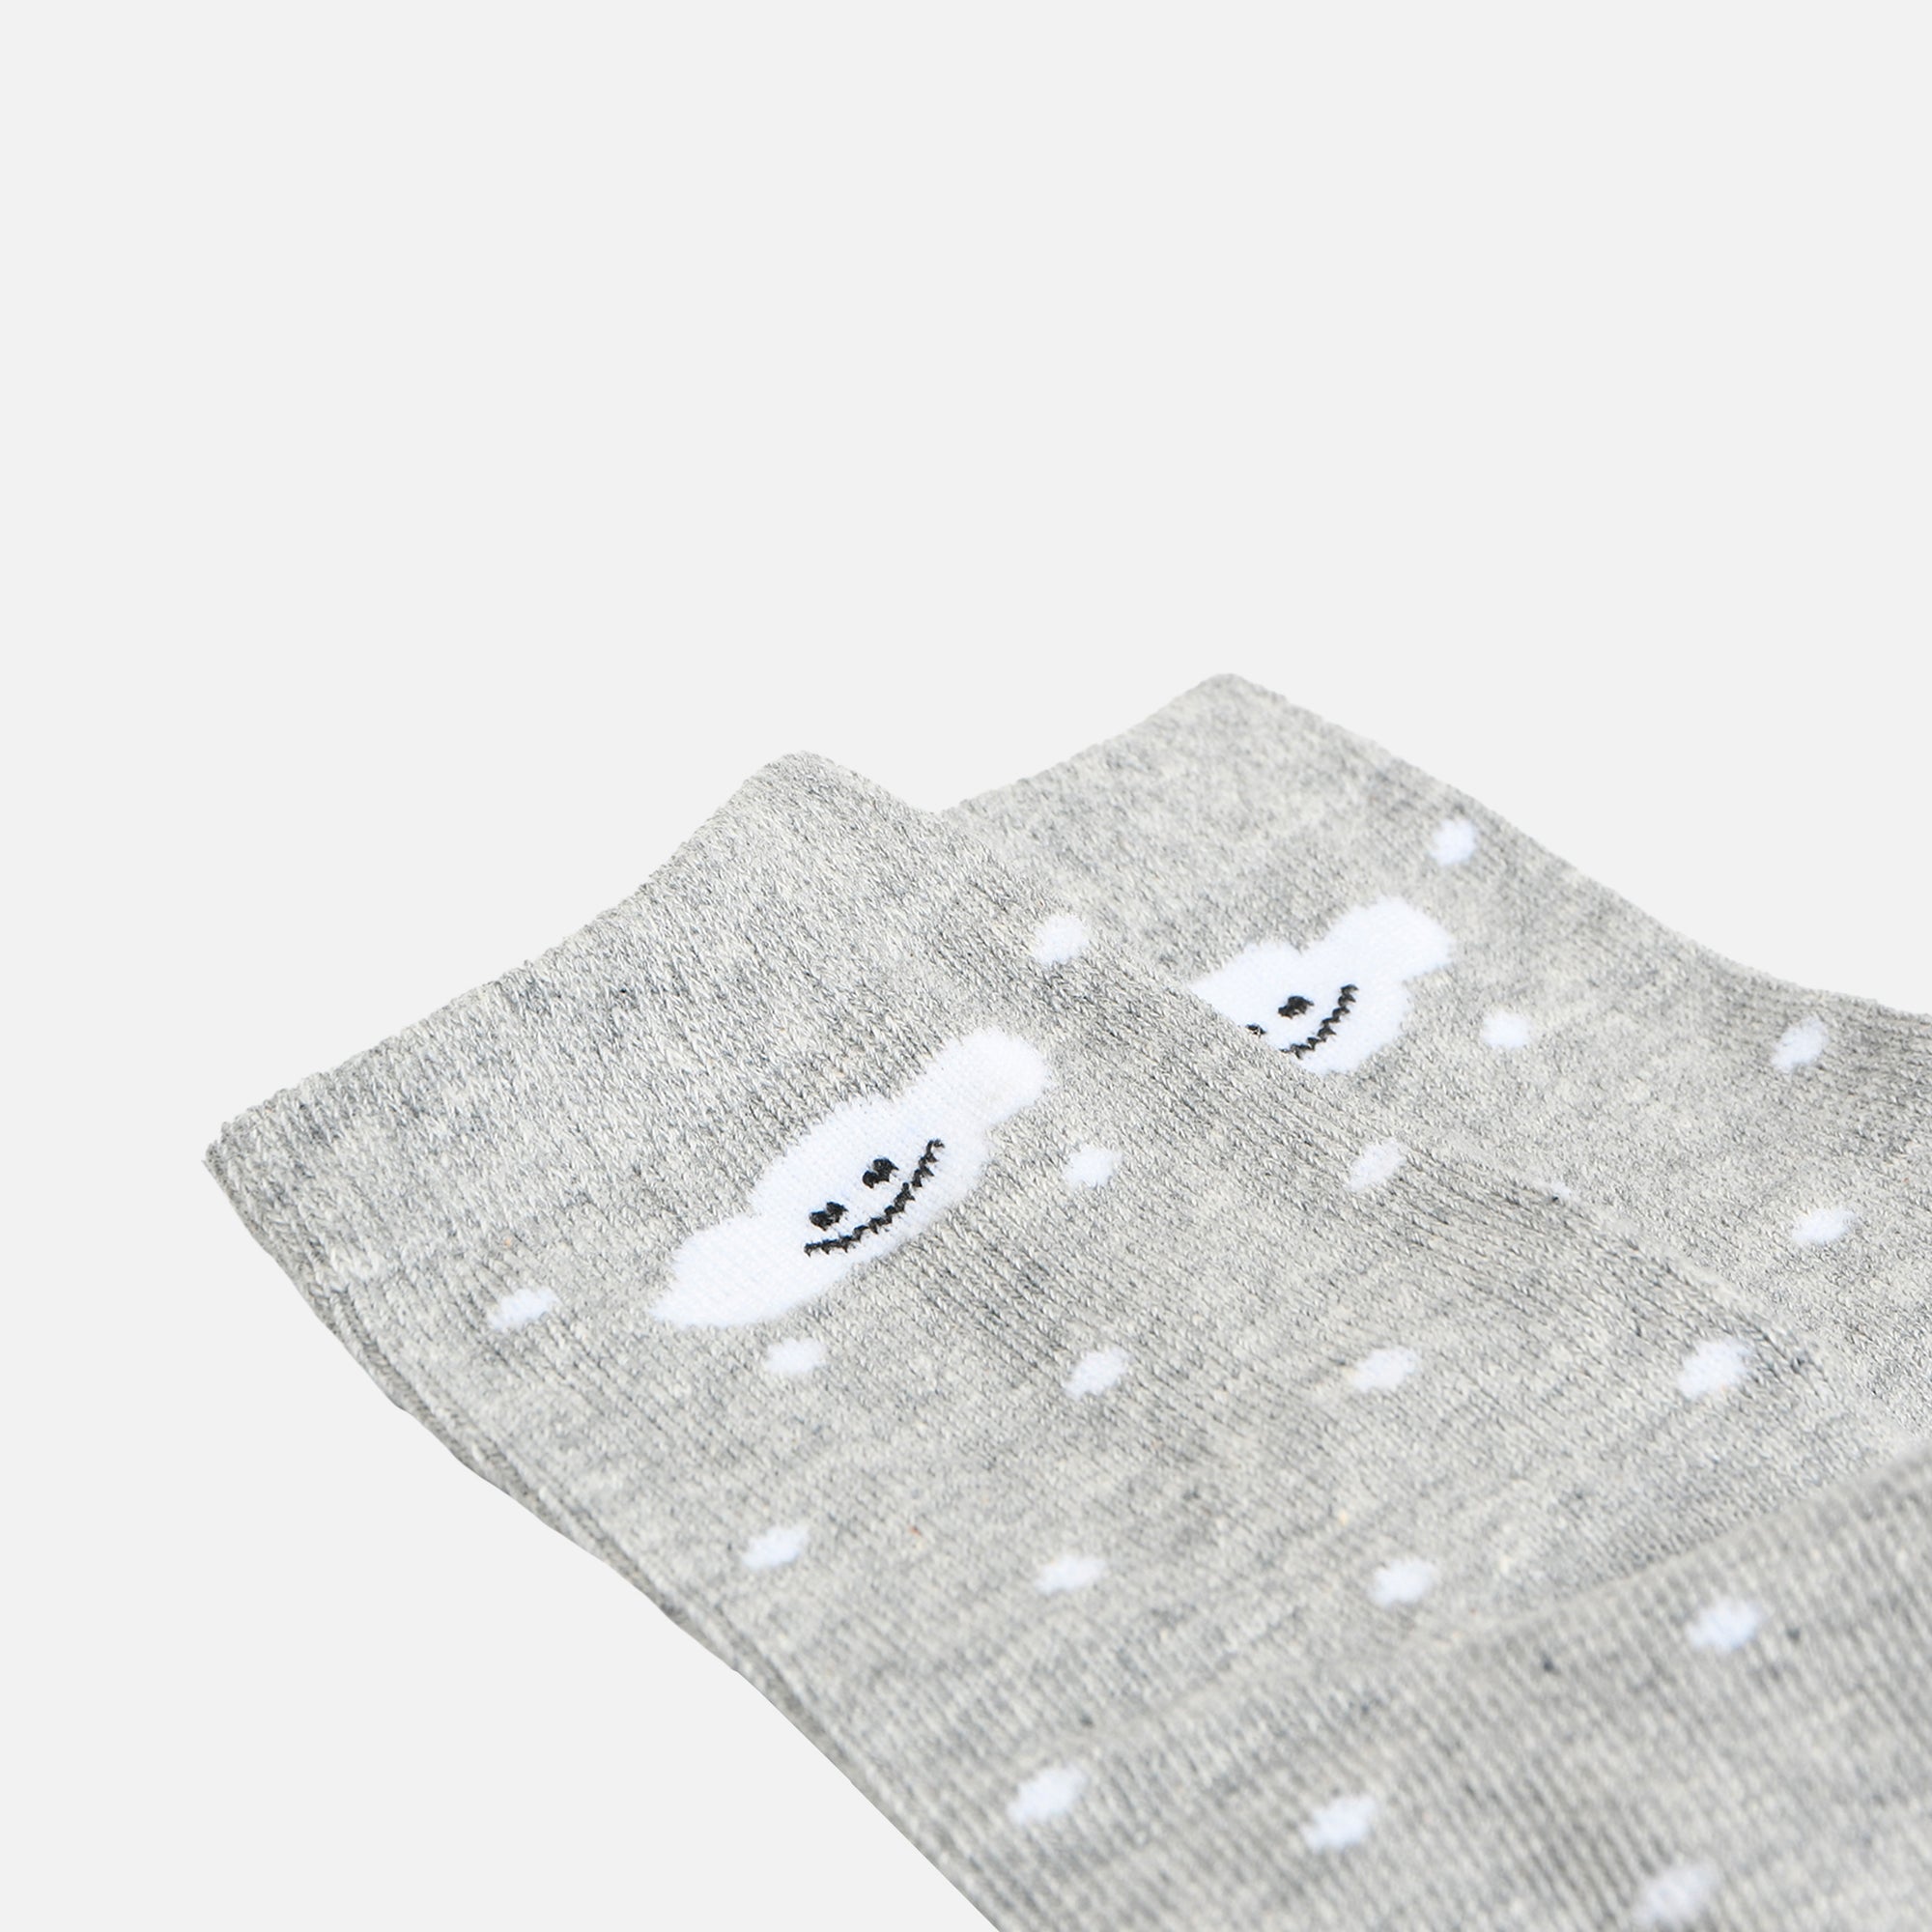 Grey socks with dots and cloud for children